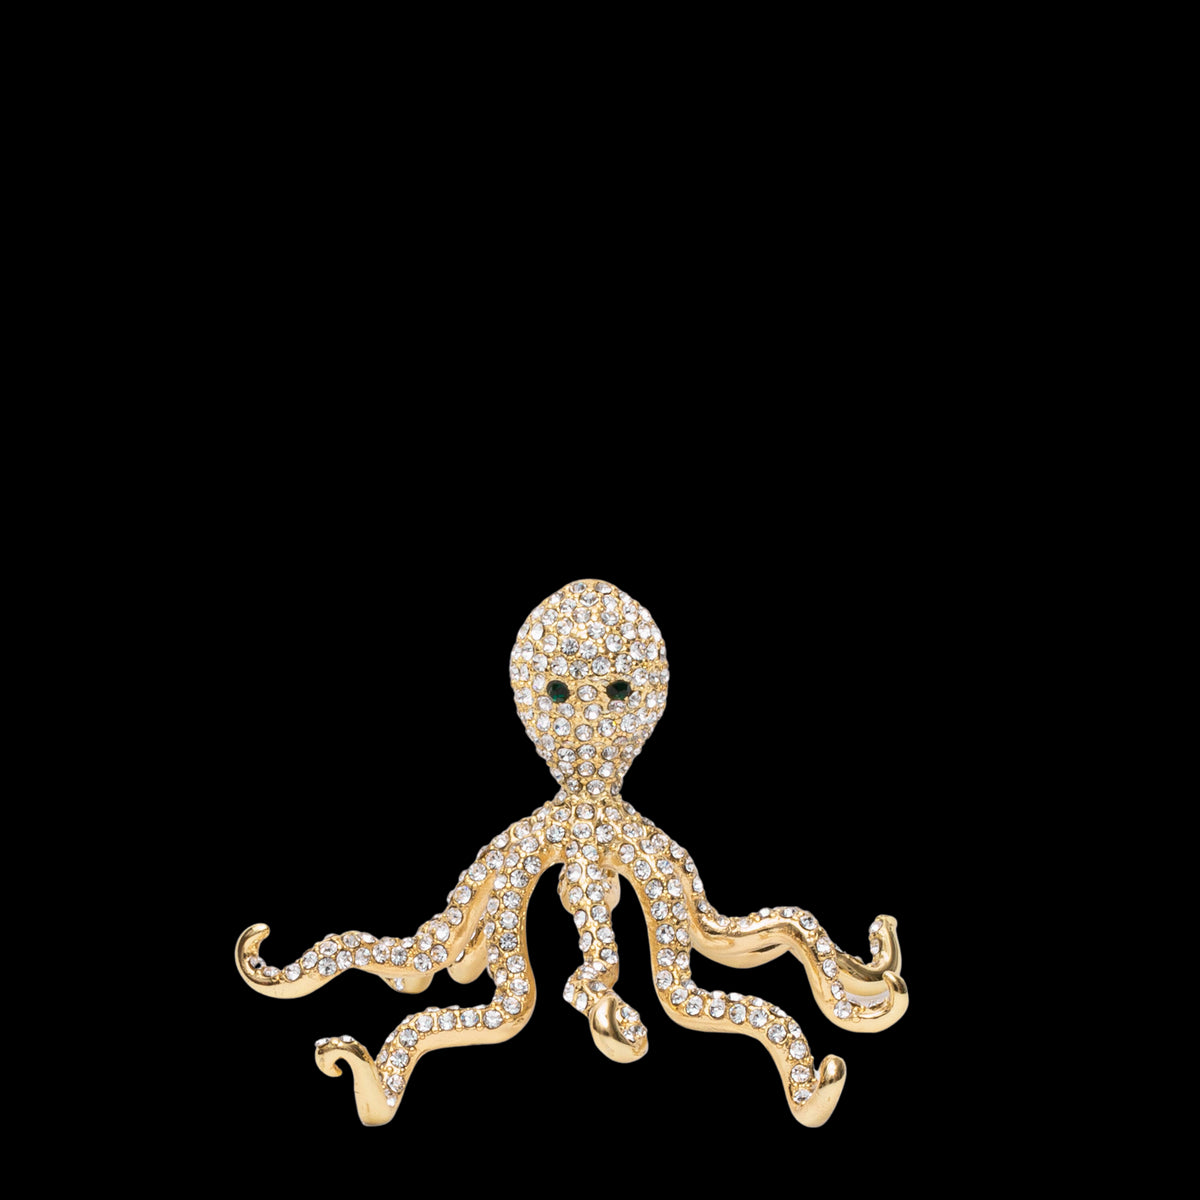 Octopus Placecard Holders, Set of Two